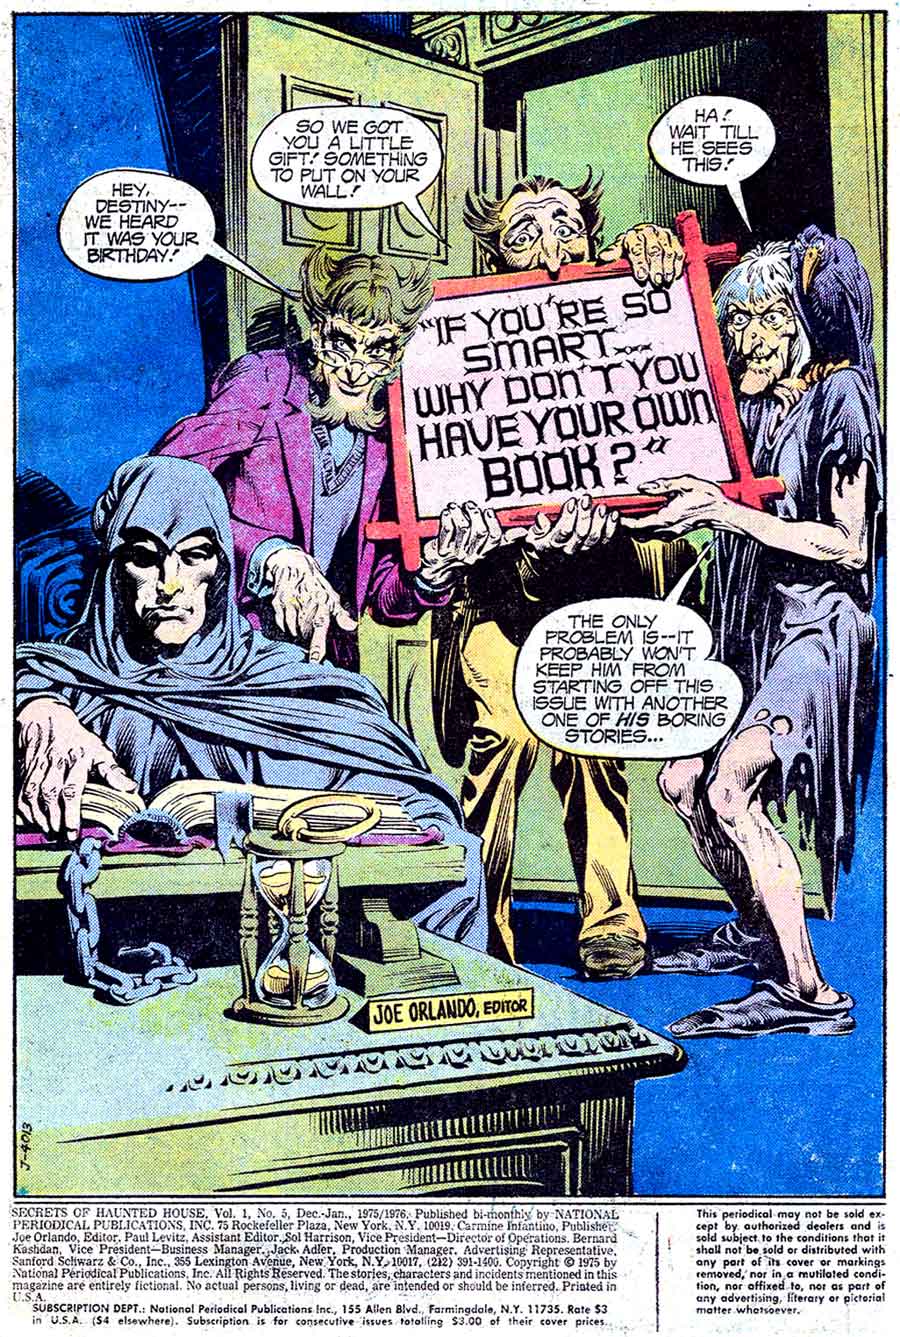 Secrets of Haunted House #5 bronze age dc horror comic book page art by Nestor Redondo